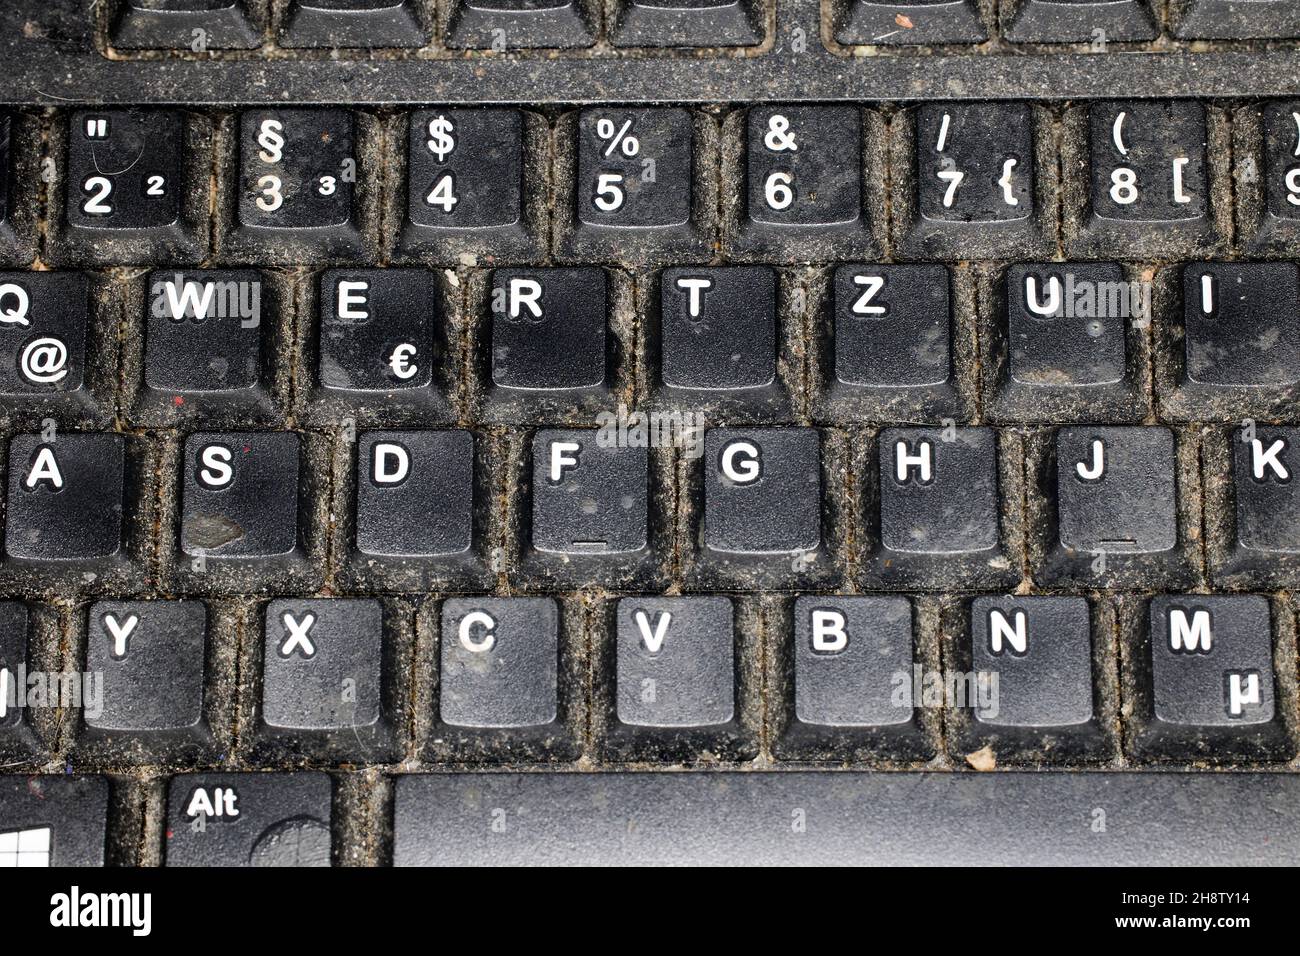 Extremely dirty keyboard of a computer Stock Photo